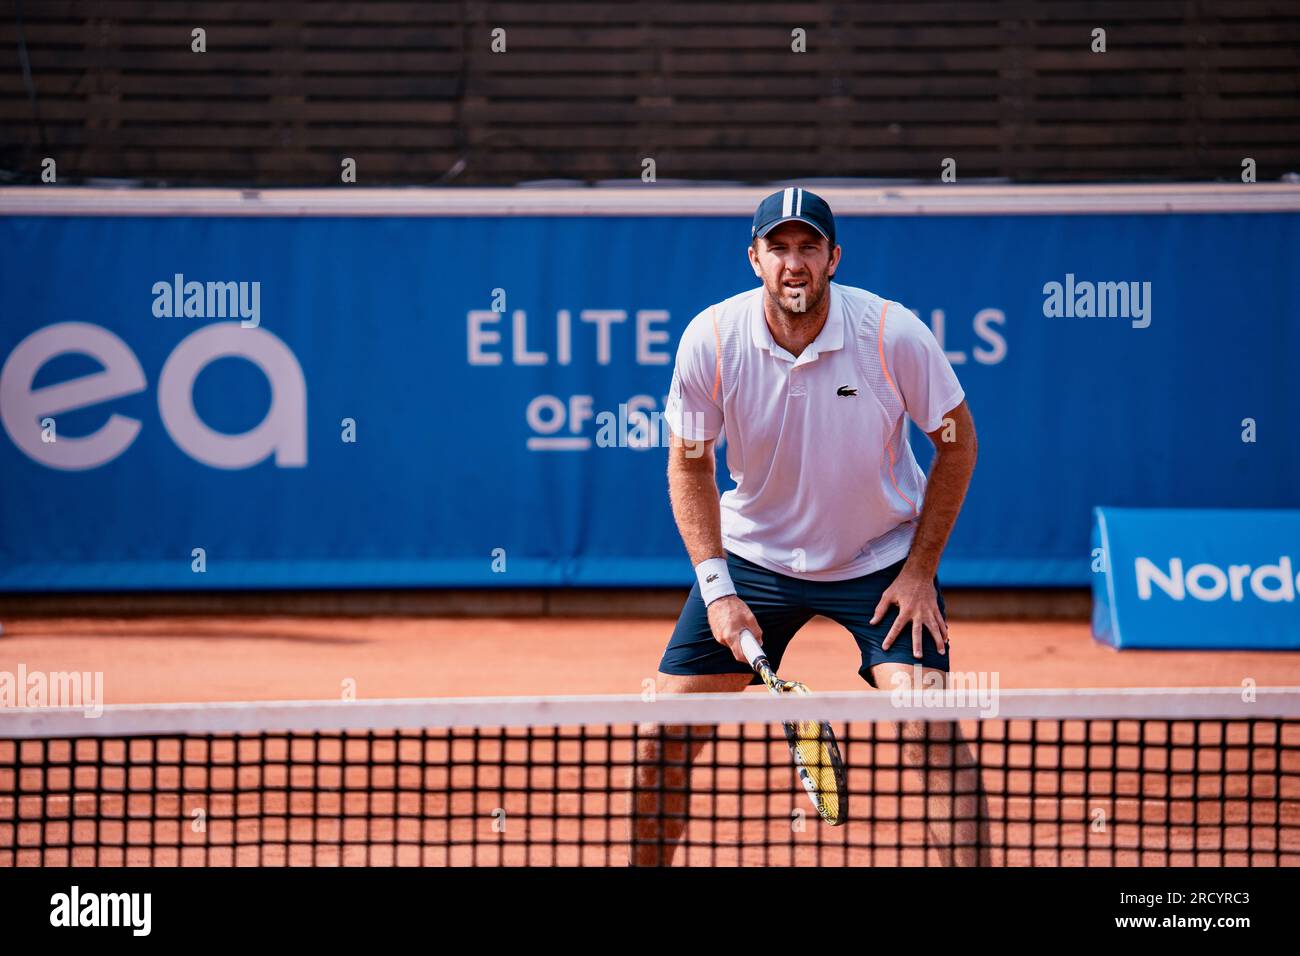 Båstad, Sweden. 07 17 2023. Fabrice Martin and Andreas Mies against Tomas Martin Etcheverry and Guillermo Duran first round. Fabrice Martin and Andreas Mies won in two sets. Credit: Daniel Bengtsson/Alamy Live News Stock Photo